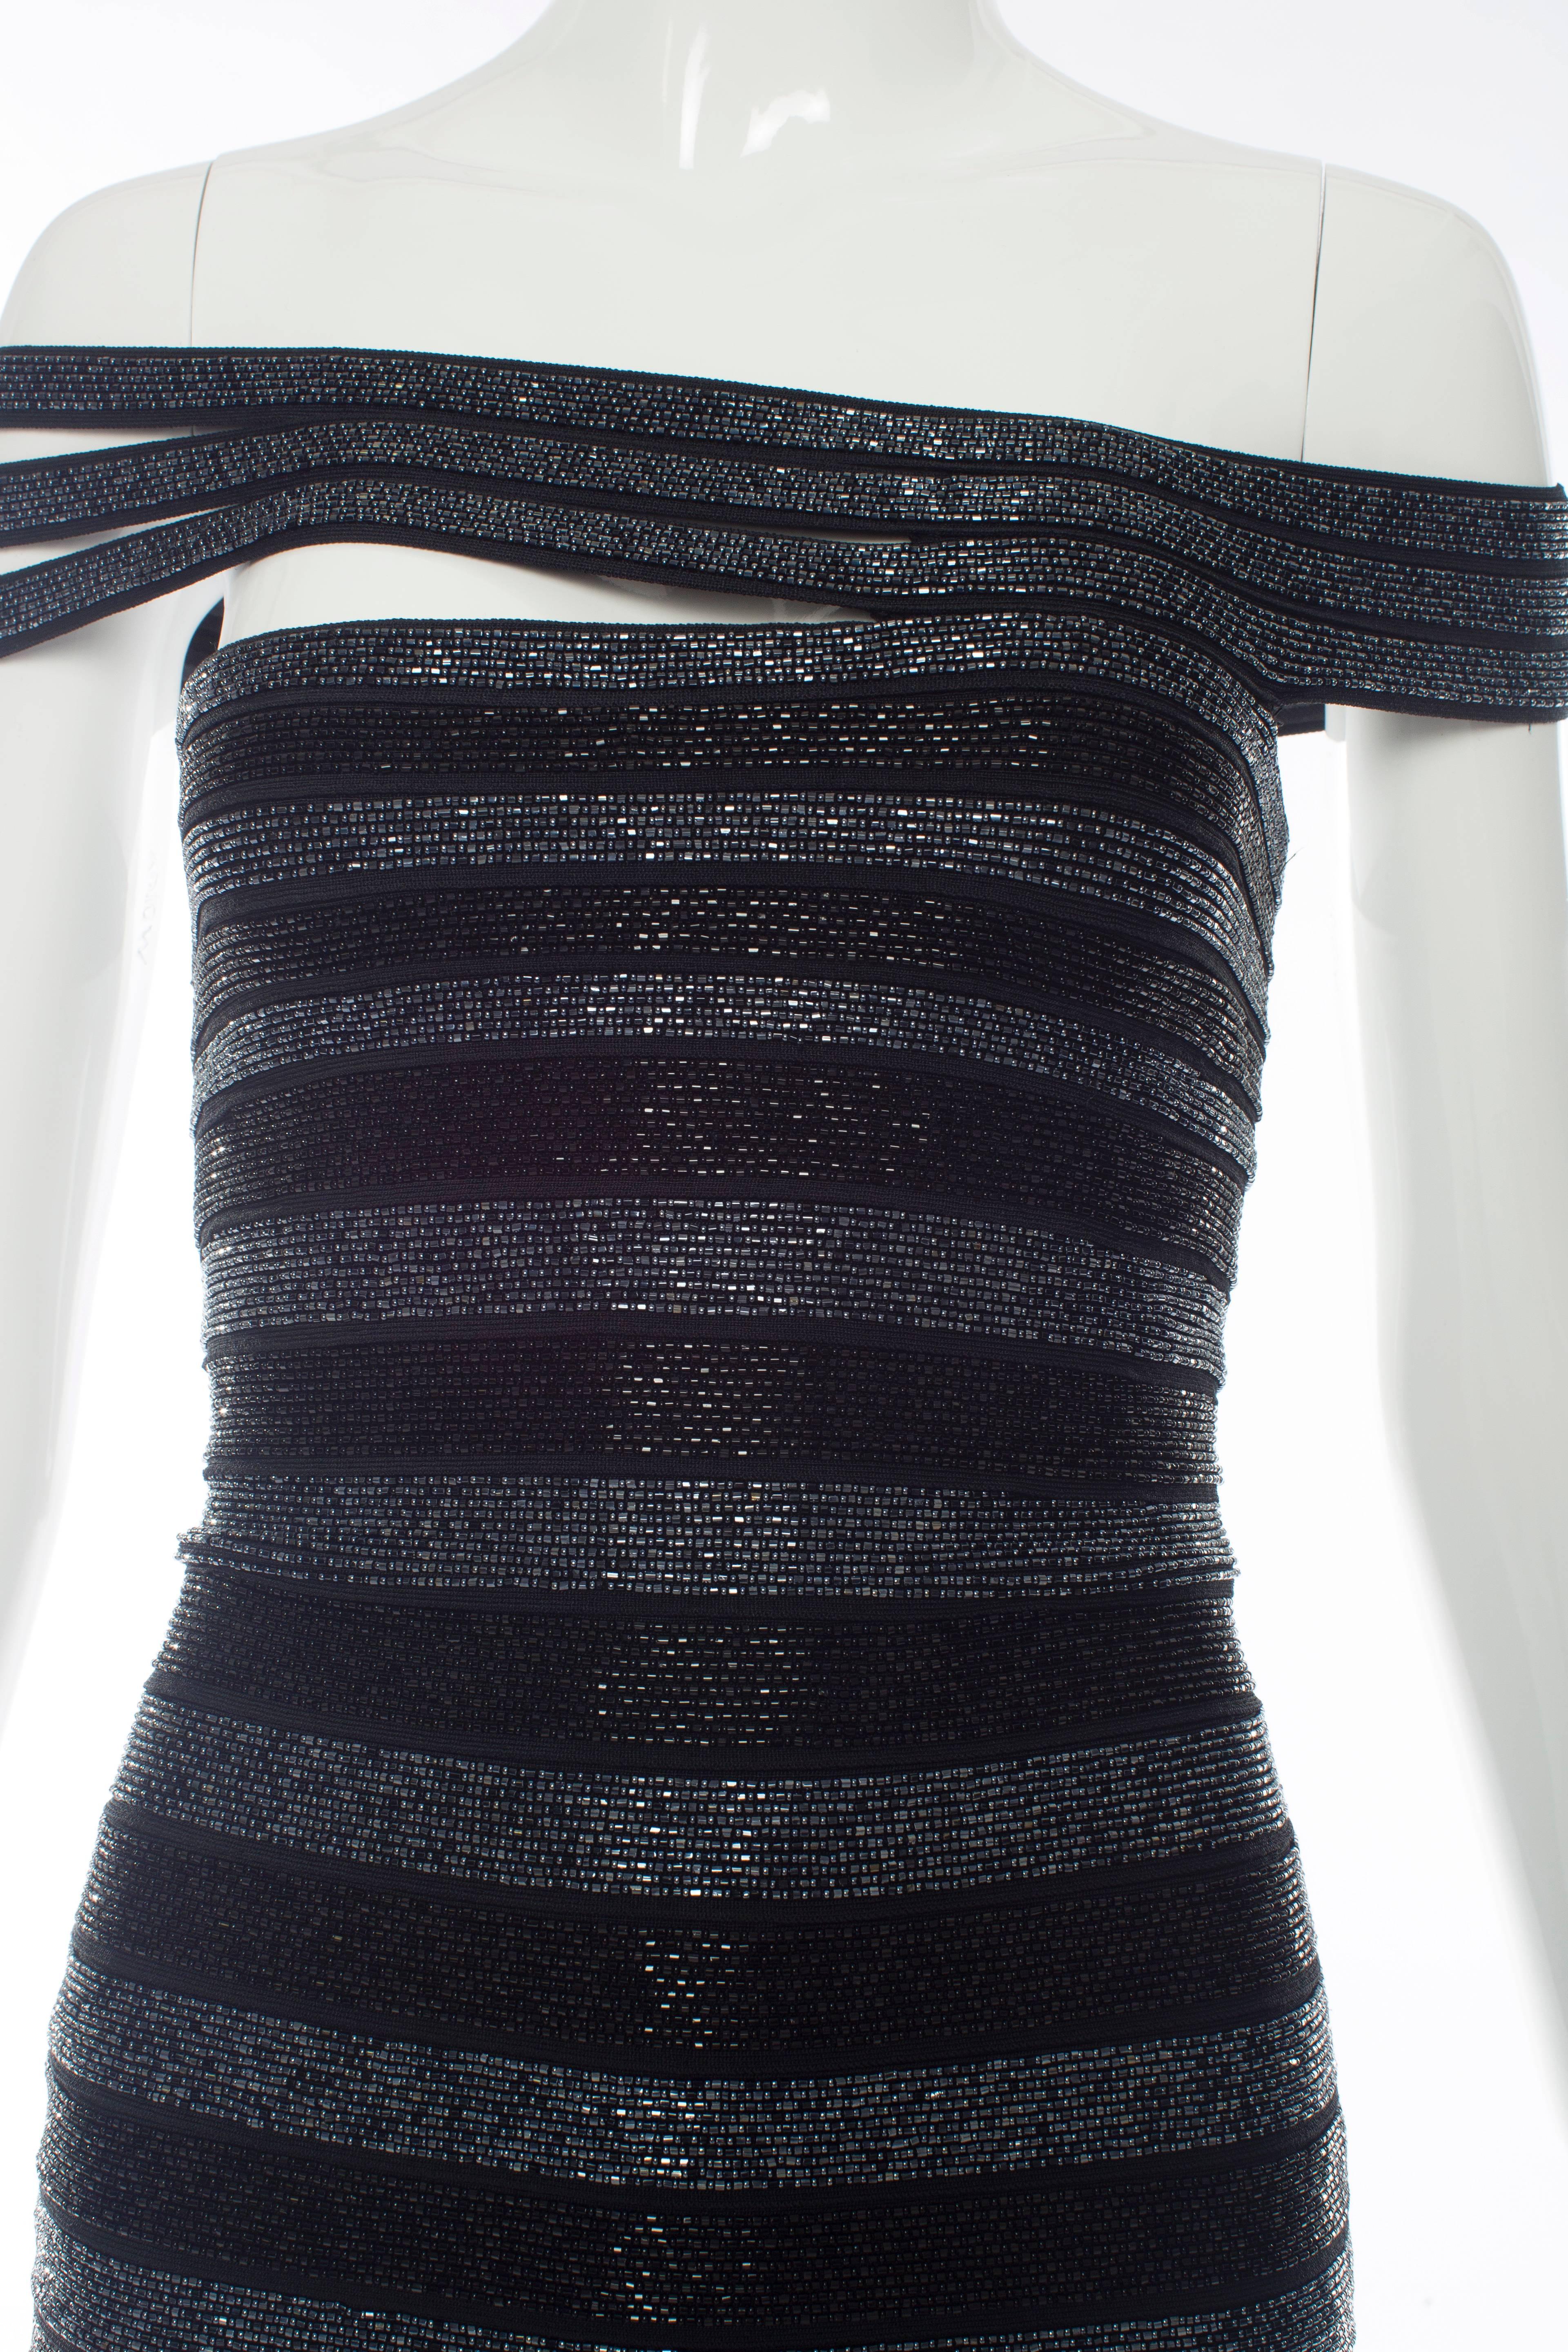 Herve Leger Couture 4